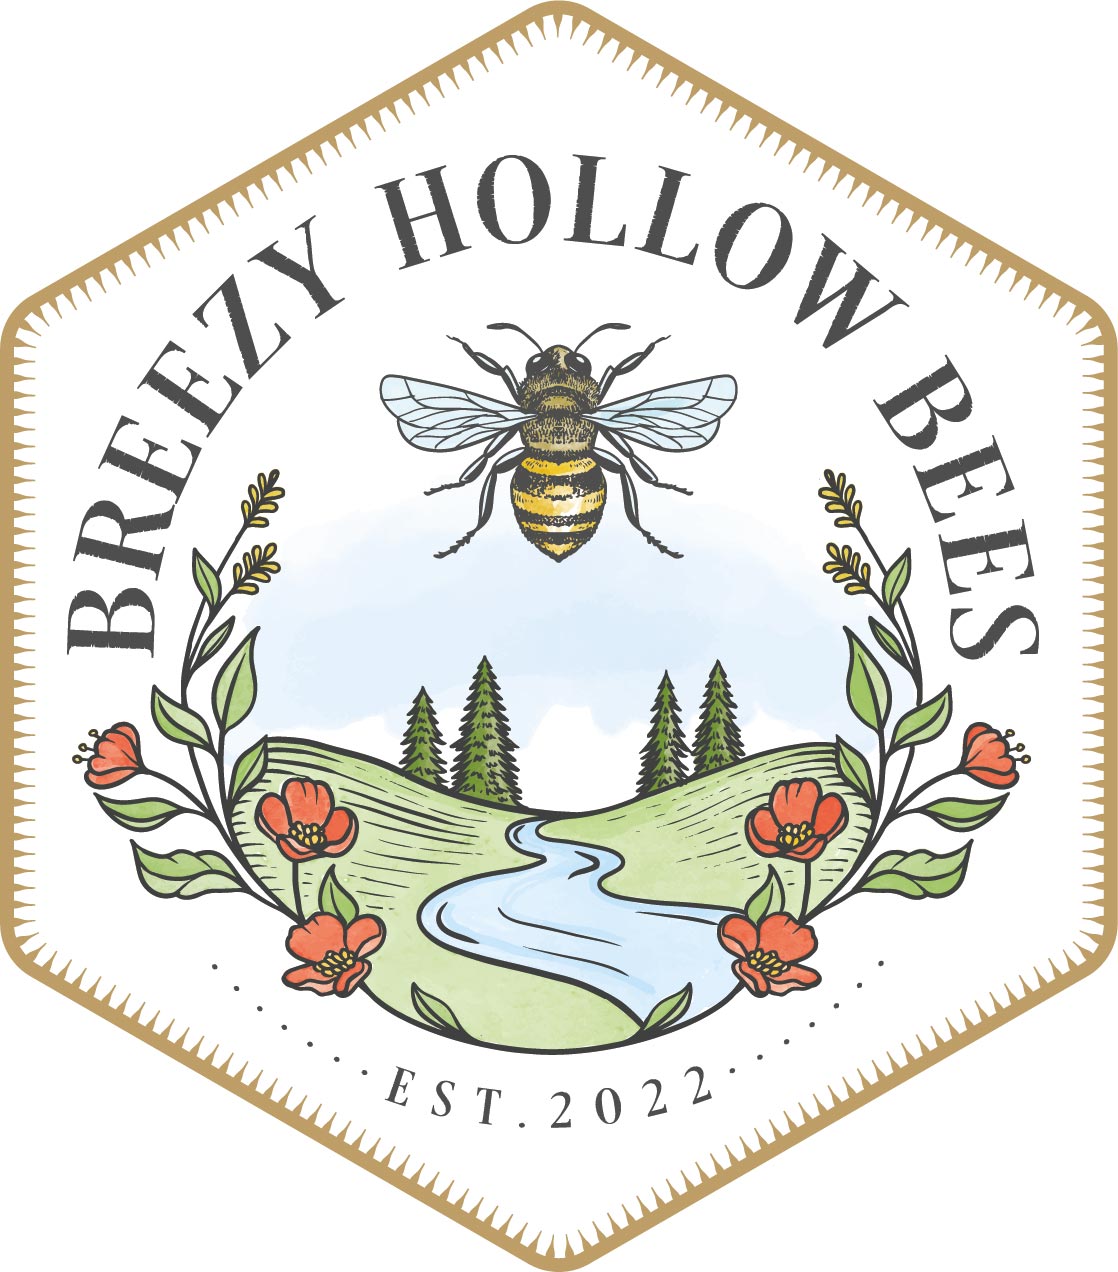 Breezy Hollow Bees